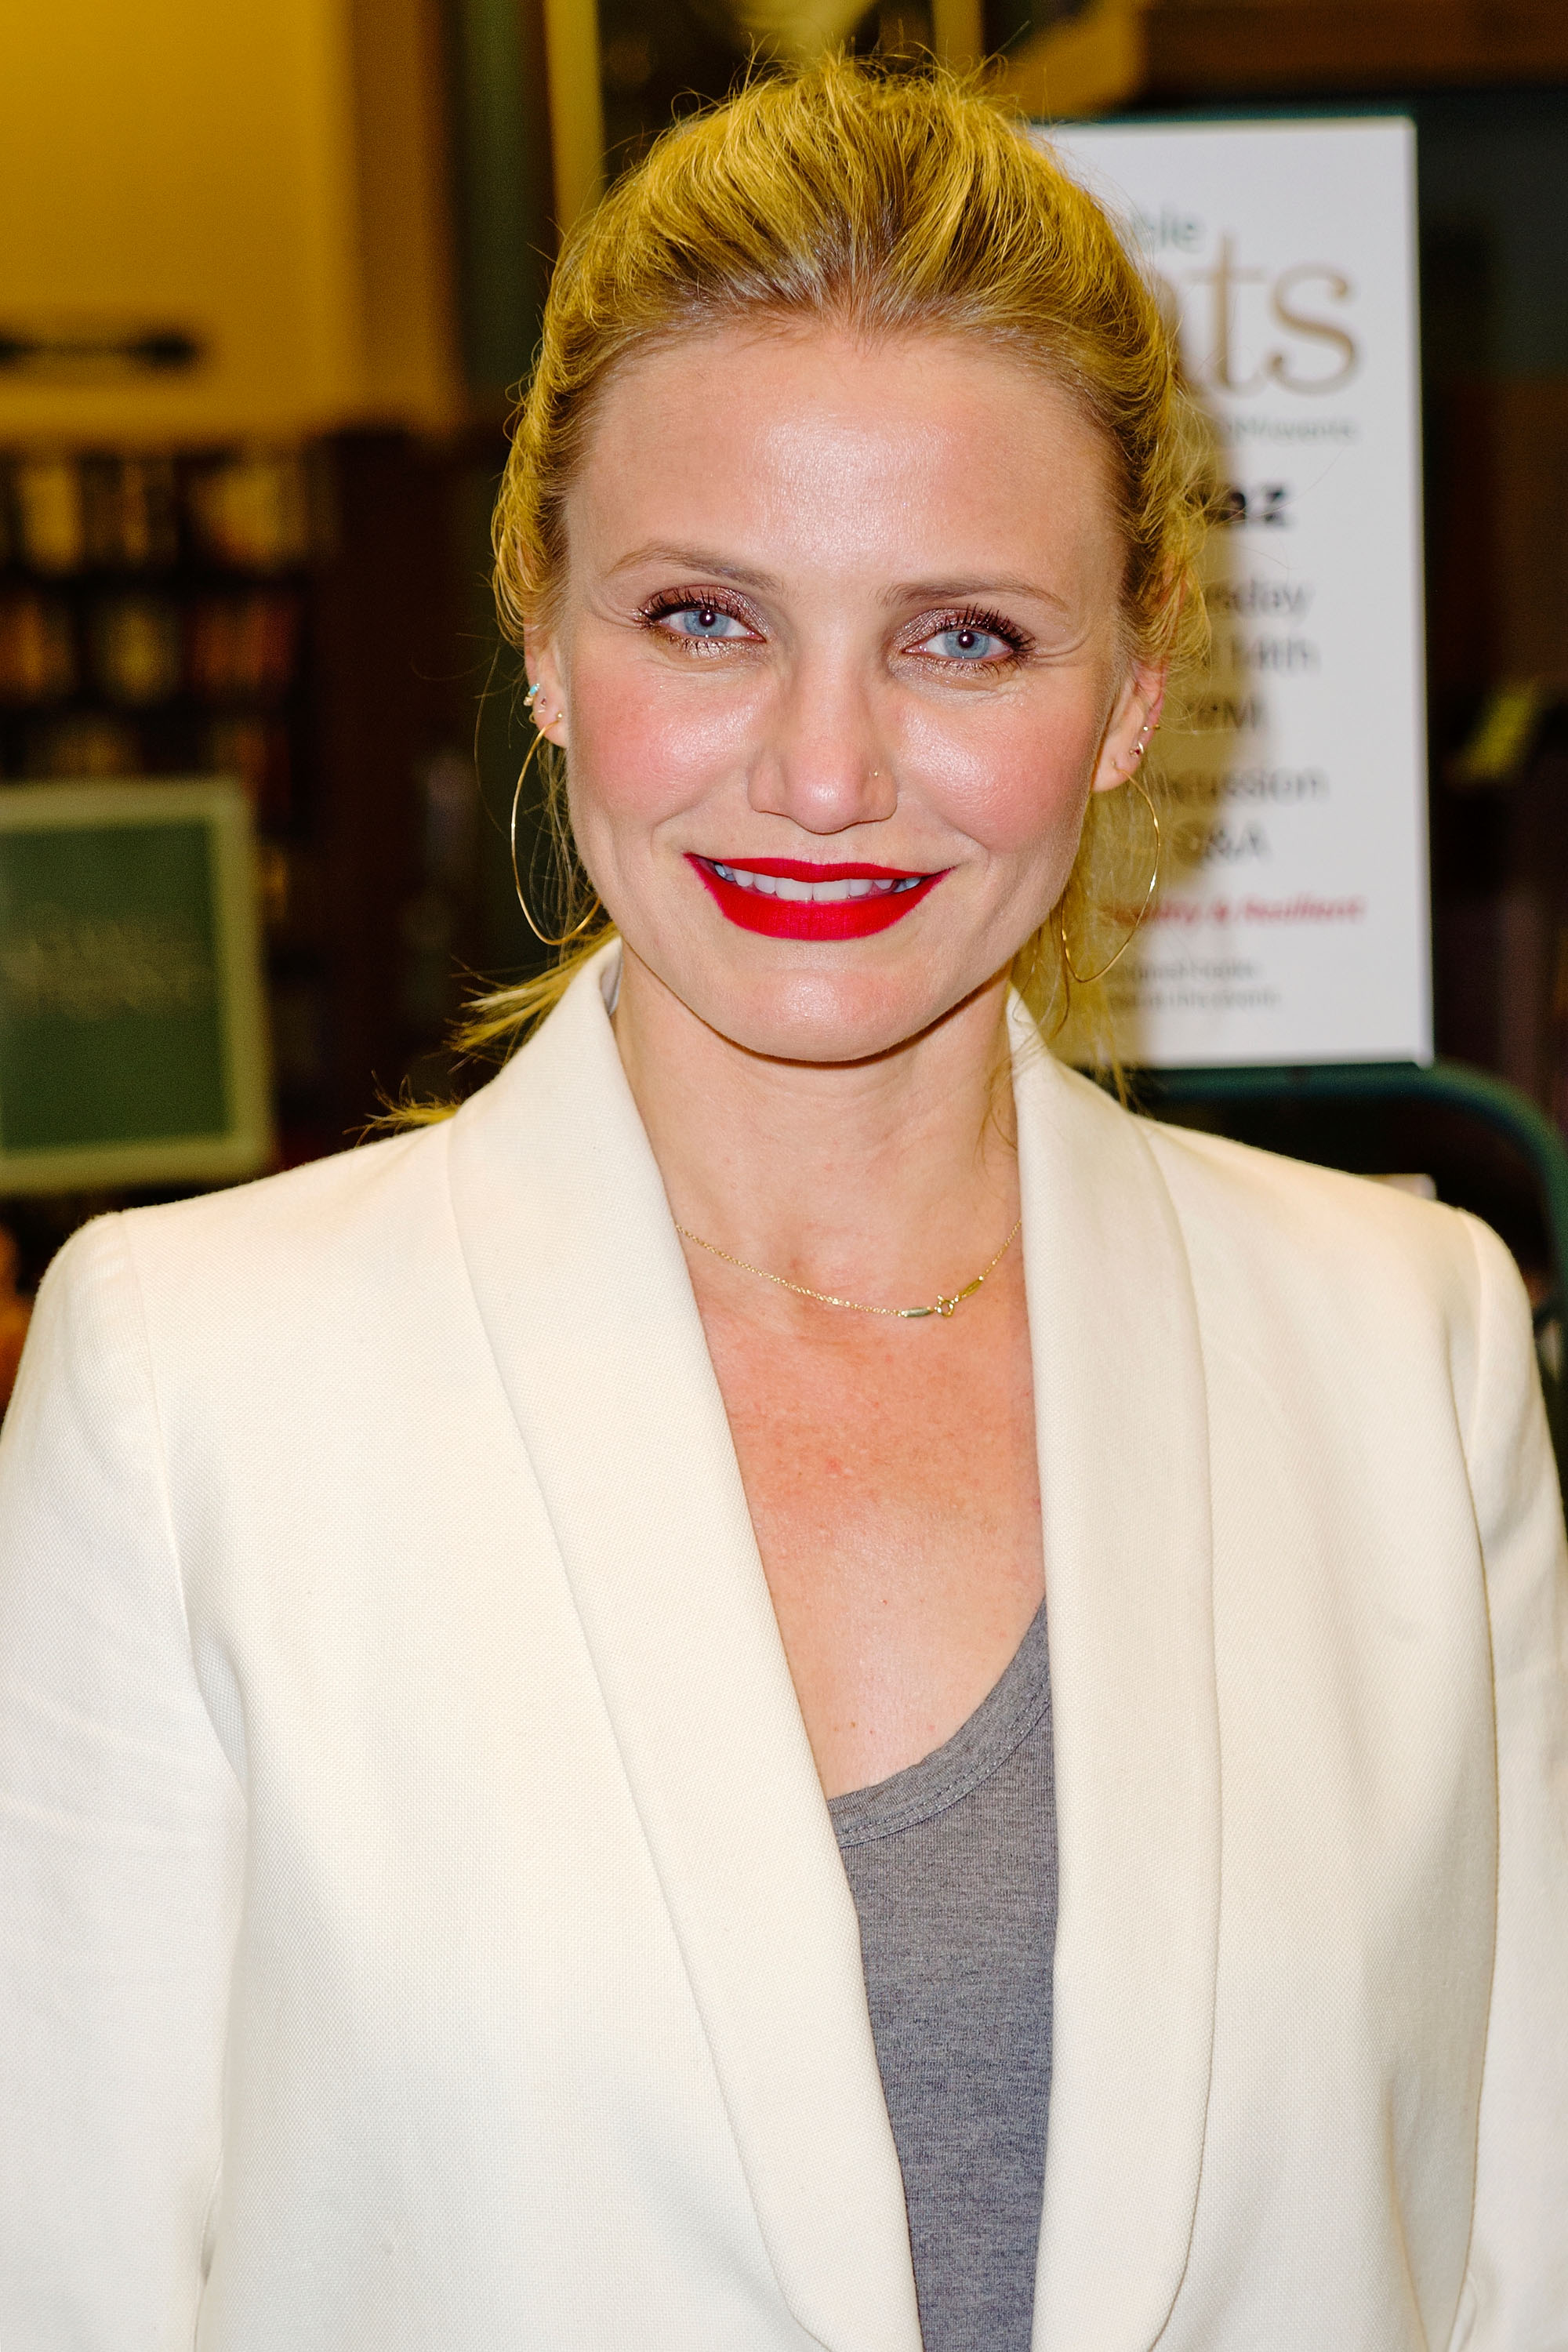 Cameron Diaz signs copies of her book 'The Longevity Book: The Science Of Aging, The Biology Of Strength, And The Privilege Of Time' at Barnes & Noble on April 14, 2016, in Huntington Beach, California. | Source: Getty Images.